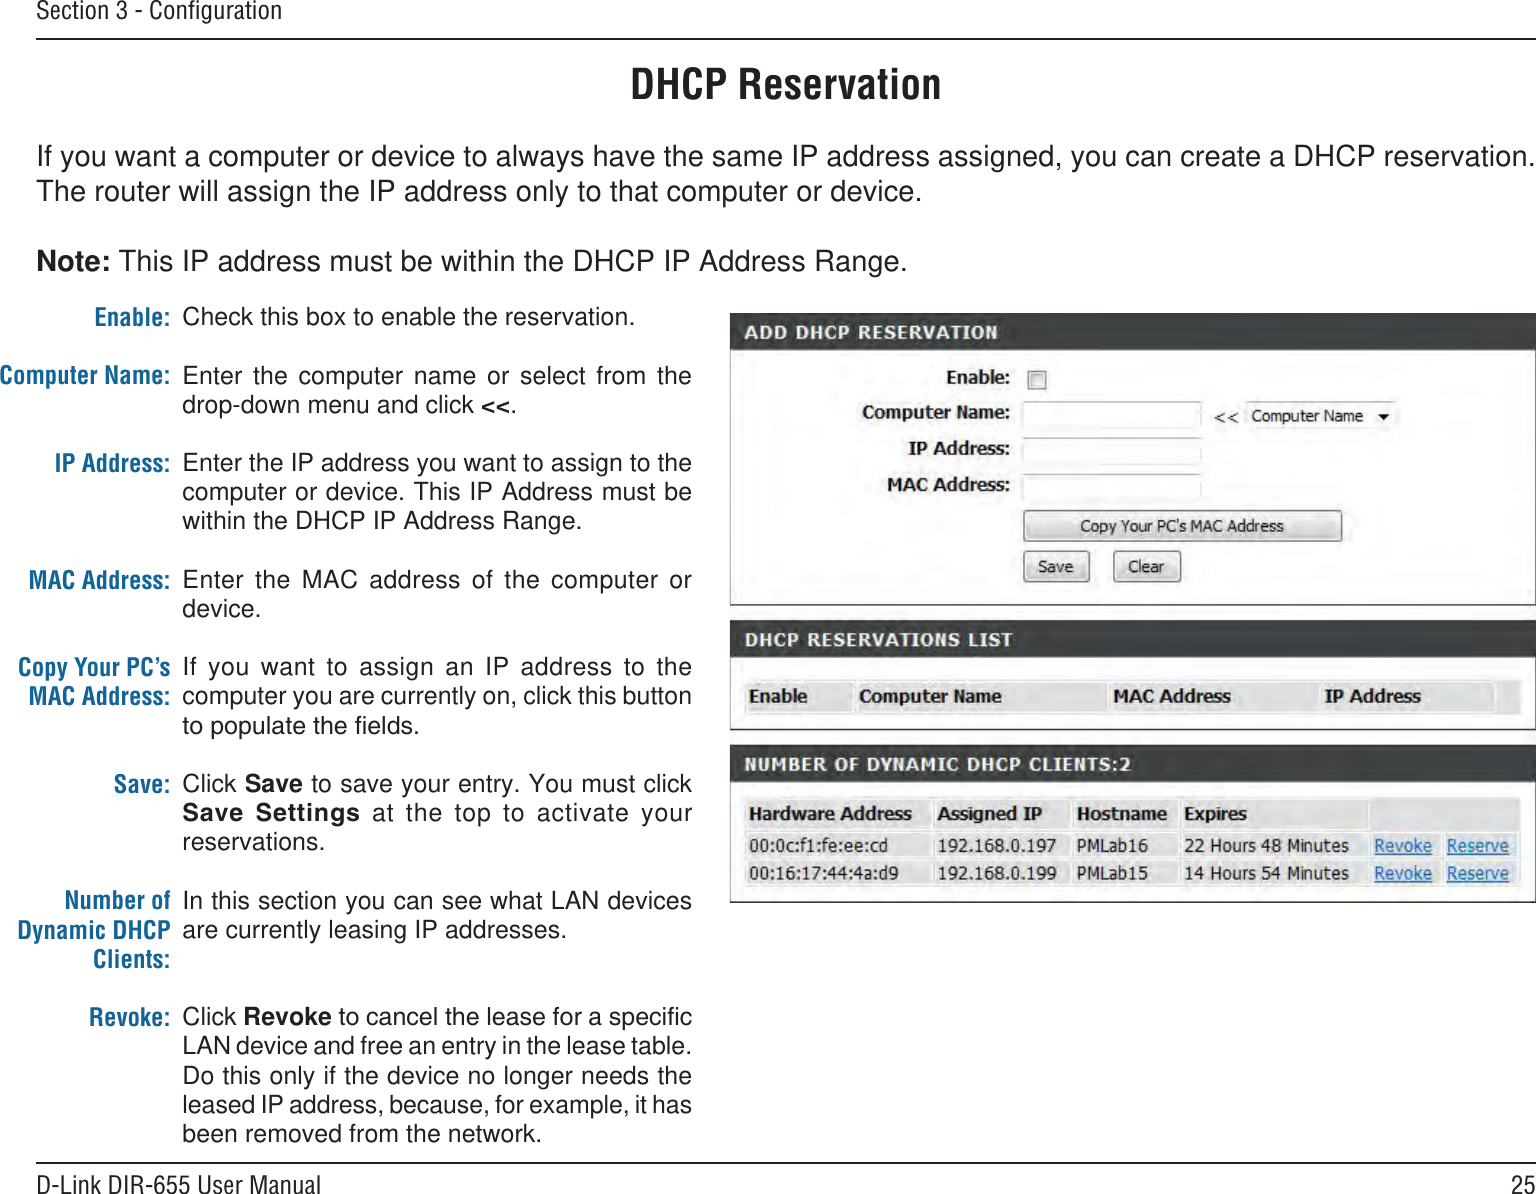 25D-Link DIR-655 User ManualSection 3 - ConﬁgurationDHCP ReservationIf you want a computer or device to always have the same IP address assigned, you can create a DHCP reservation. The router will assign the IP address only to that computer or device. Note: This IP address must be within the DHCP IP Address Range.Check this box to enable the reservation.Enter  the  computer  name  or  select  from  the drop-down menu and click &lt;&lt;.Enter the IP address you want to assign to the computer or device. This IP Address must be within the DHCP IP Address Range.Enter  the  MAC  address  of  the  computer  or device.If  you  want  to  assign  an  IP  address  to  the computer you are currently on, click this button Click Save to save your entry. You must click    at  the  top  to  activate  your reservations. In this section you can see what LAN devices are currently leasing IP addresses.Click RevokeLAN device and free an entry in the lease table. Do this only if the device no longer needs the leased IP address, because, for example, it has been removed from the network.Enable:Computer Name:IP Address:MAC Address:Copy Your PC’s MAC Address:Save:Number of Dynamic DHCP Clients:Revoke: